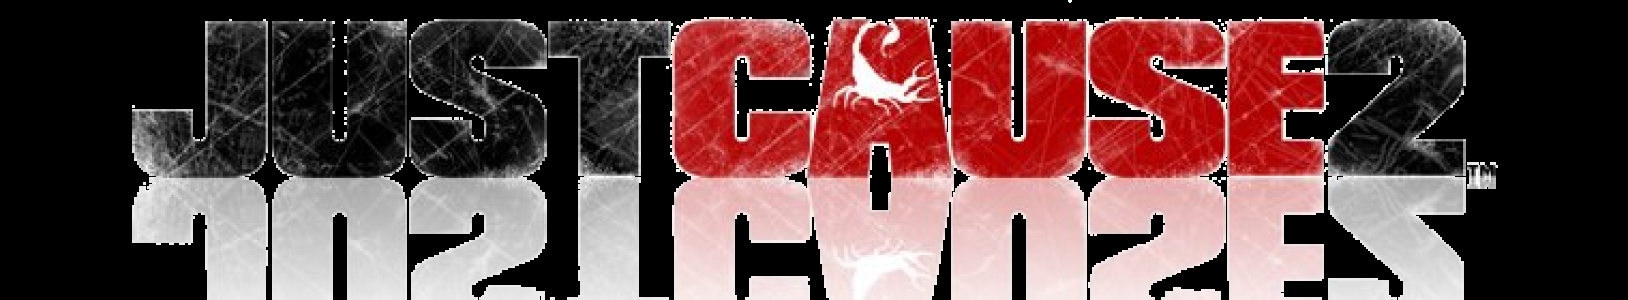 Just Cause 2 clearlogo